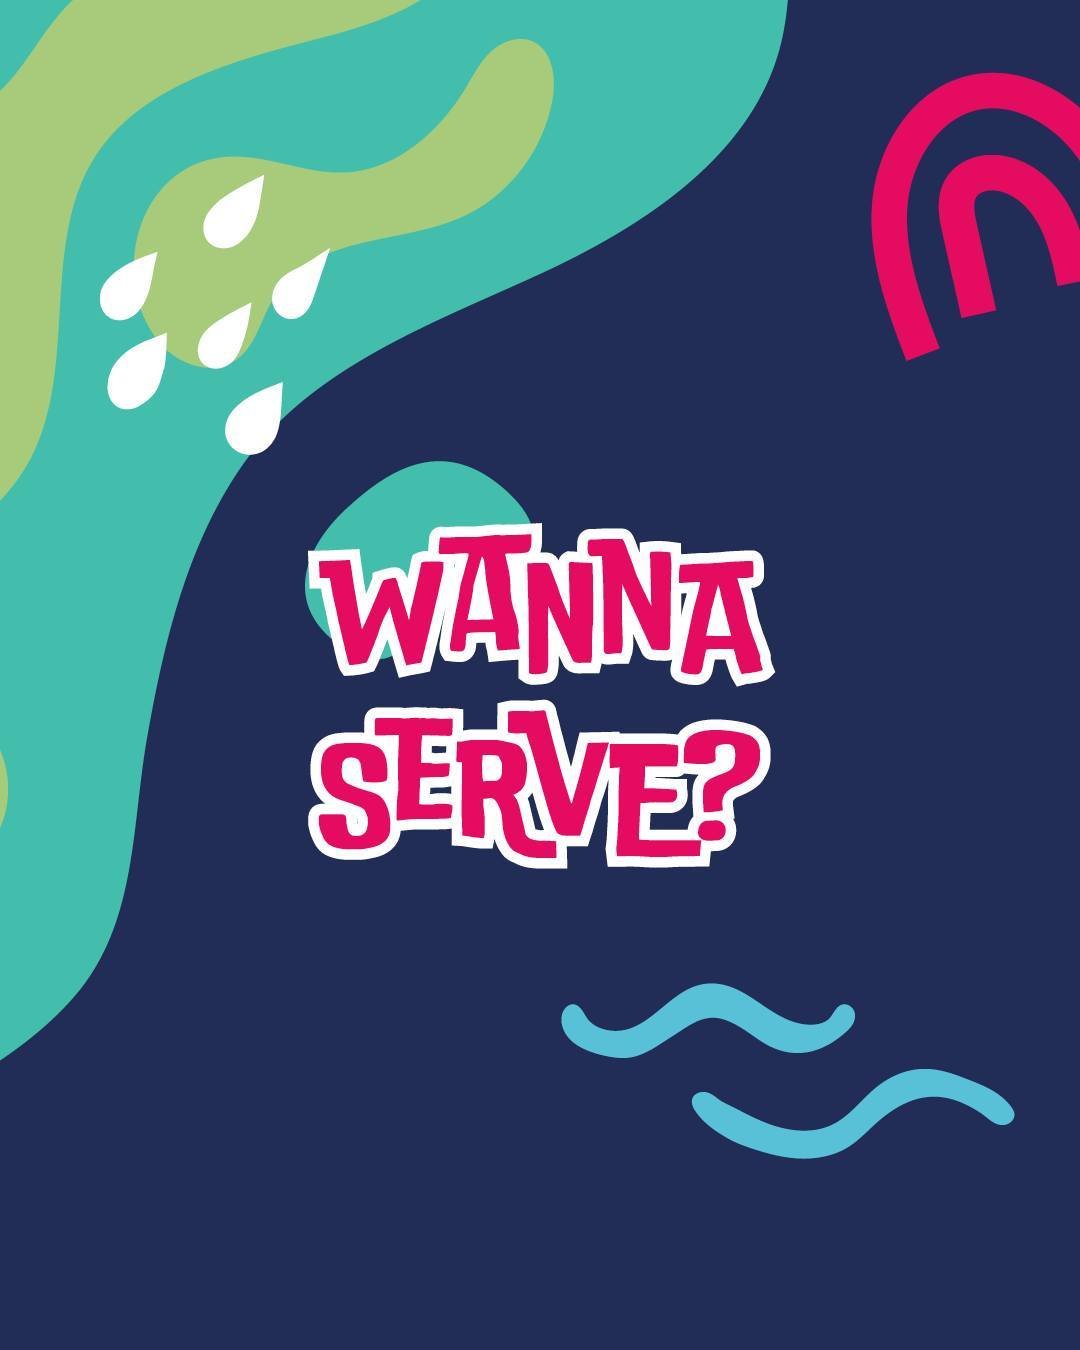 Come and be part of the incredible team of servers helping to make our FIRST EVER More Together festival an incredible event for all who attend.⁠ ⁠
⁠
Gathering as churches, leaving as one family.⁠
⁠
Apply today! Find the link in our profile